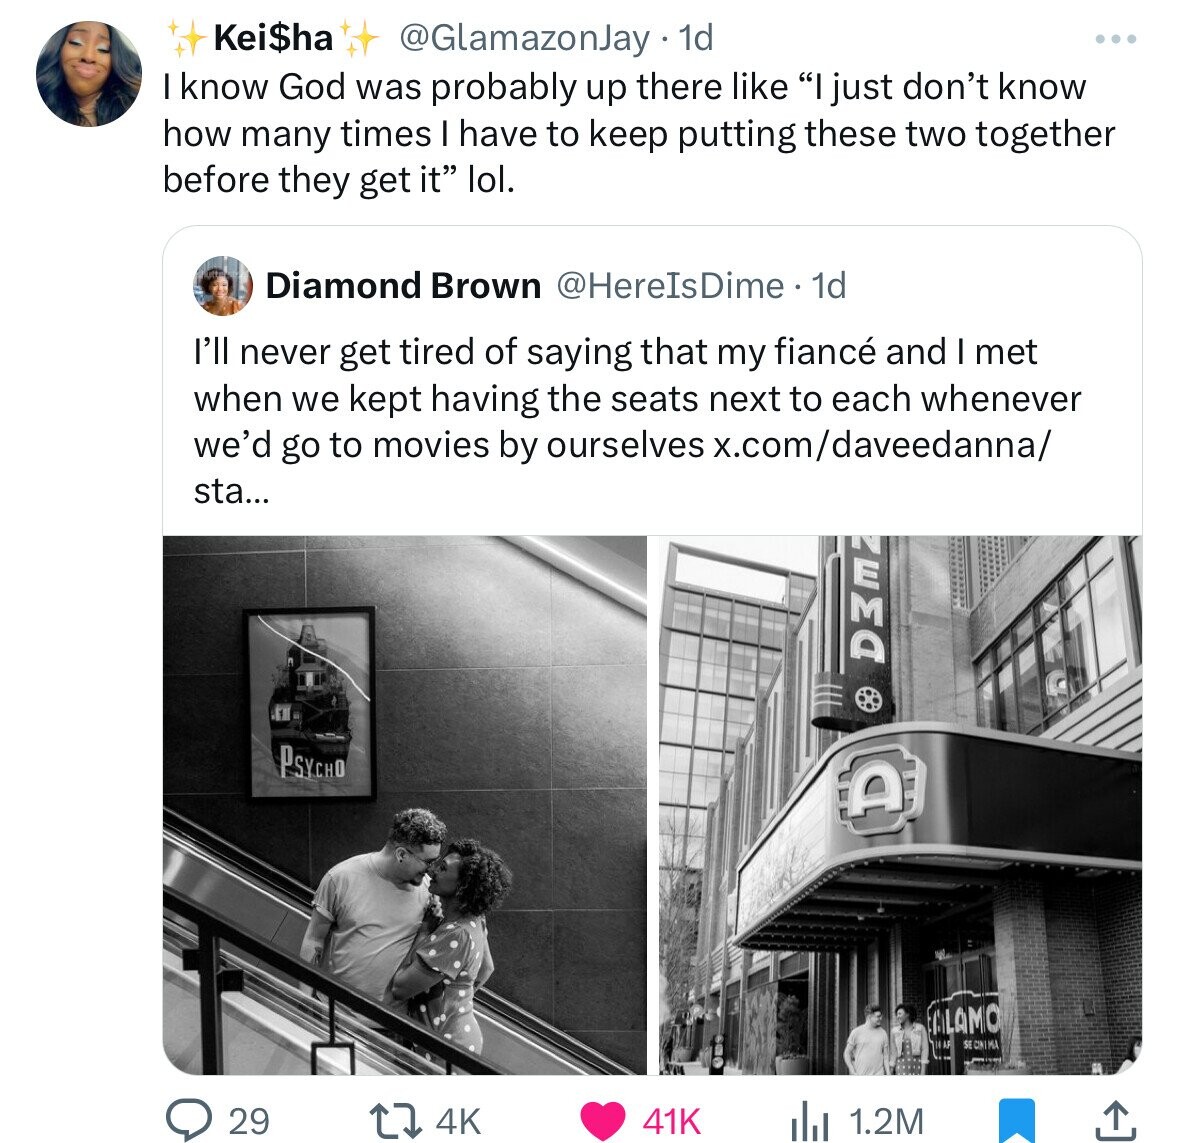 screenshot - Kei$ha 1d I know God was probably up there "I just don't know how many times I have to keep putting these two together before they get it" lol. Diamond Brown Dime. 1d I'll never get tired of saying that my fianc and I met when we kept having 